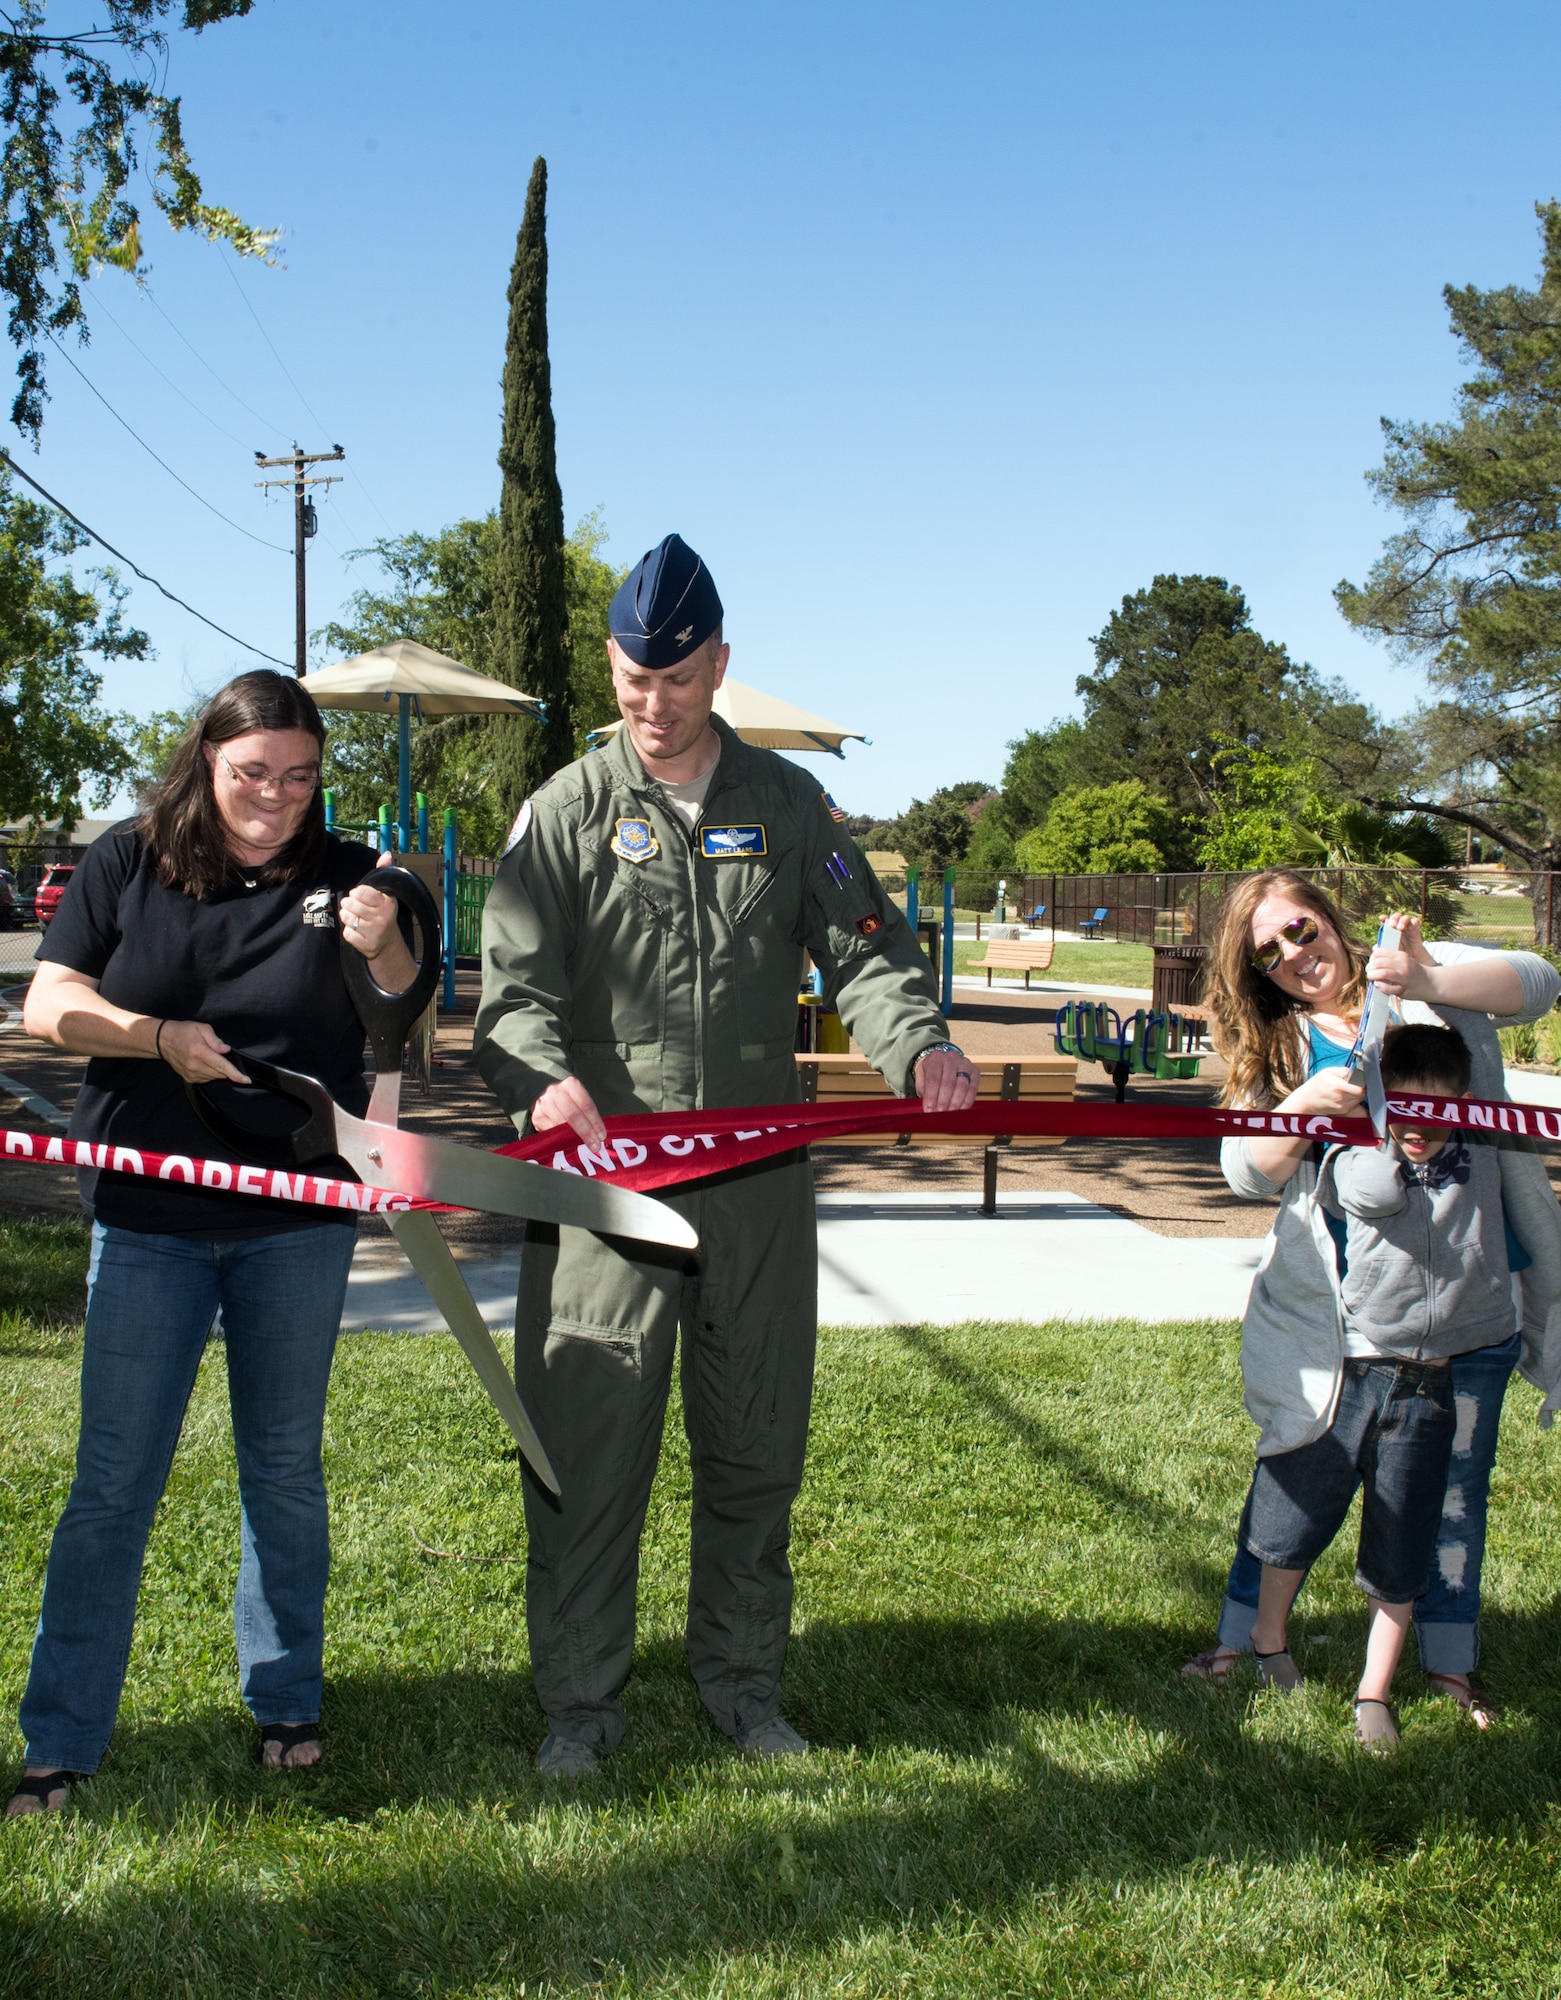 Col. Matthew Leard, center, 60th Air Mobility Wing vice commander, helps cut a ribbon for a new park with Vanessa Pearson, left, and Bendle Bell, right, at Travis Air Force Base, Calif., May 11, 2018. “The Inclusive Park” was an 18-month project and is designed for all abilities with emphasis on military families with special needs. (U.S. Air Force photo by Louis Briscese)